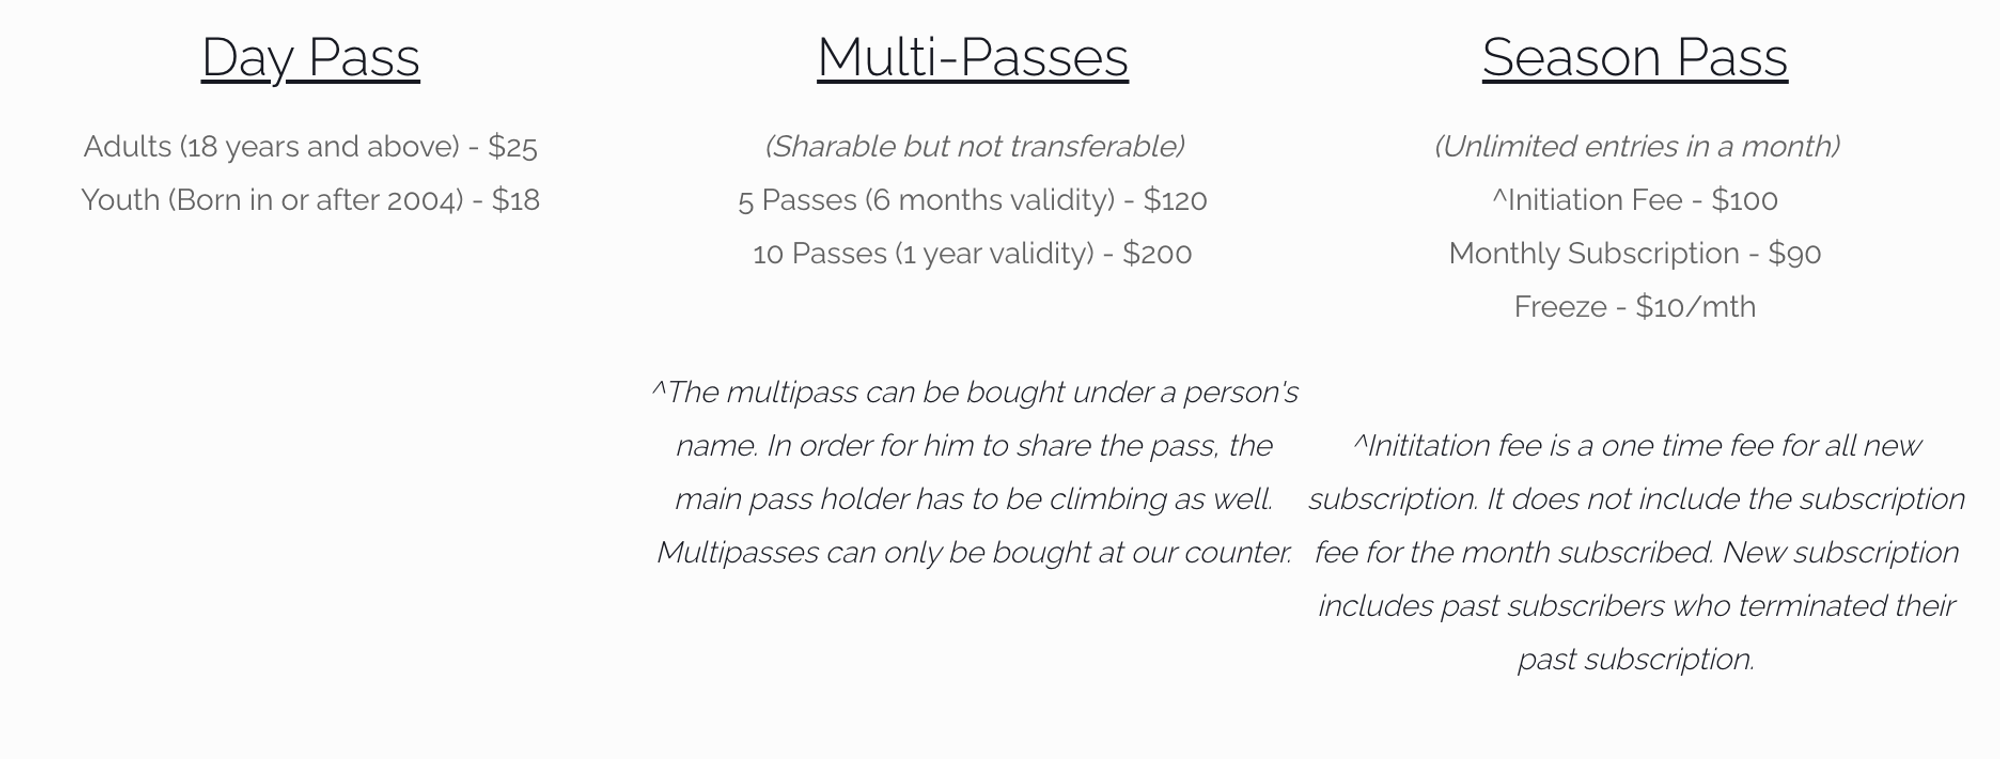 Multipass: $20/session. Daypass: $25/session
Taken from https://boulderworld.com/rates/